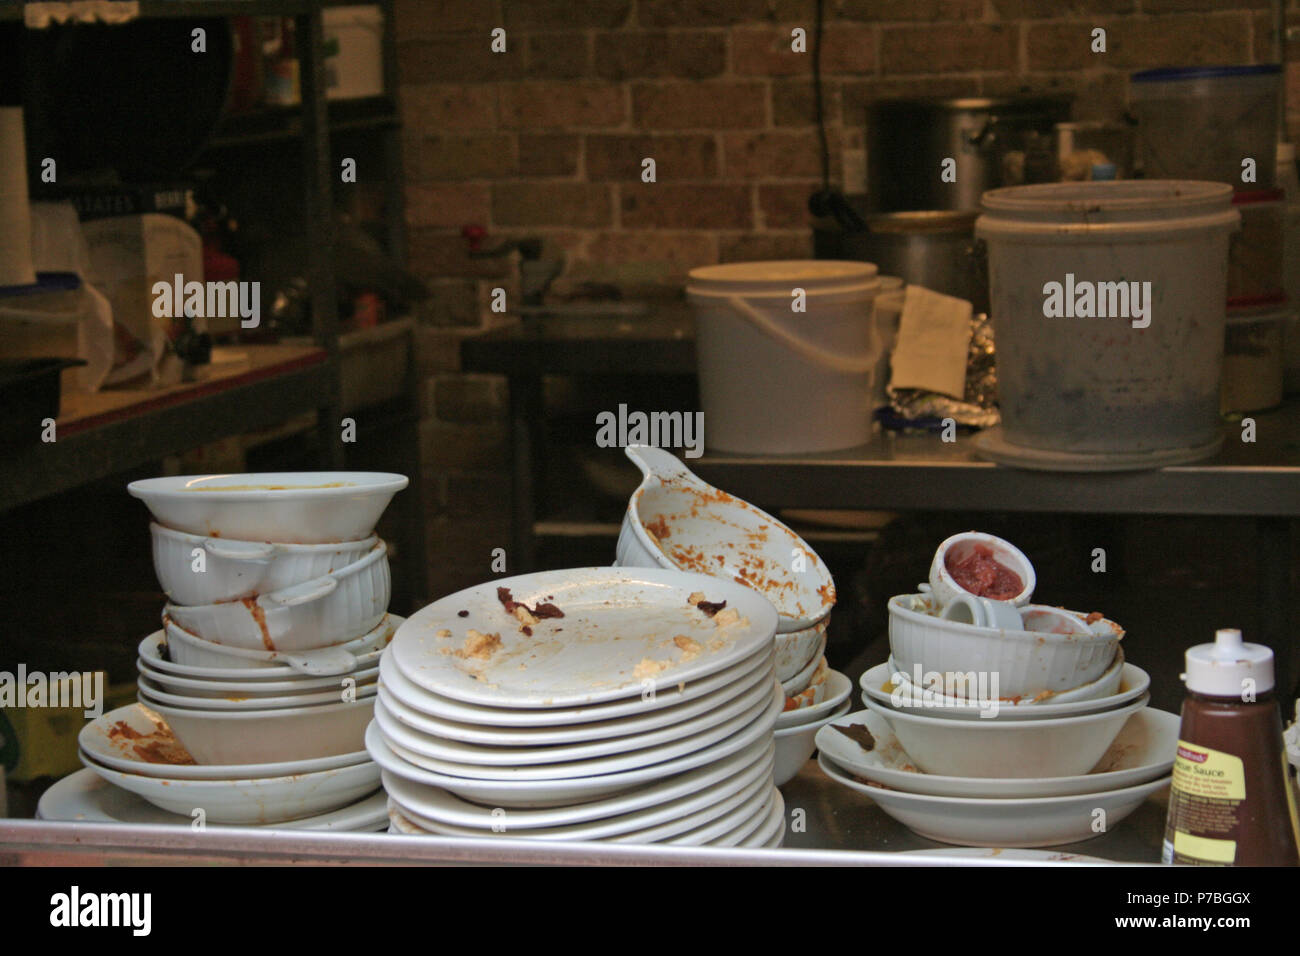 DIRTY DISHES STACKED AND READY FOR WASHING IN A SMALL CAFE IN SYDNEY, AUSTRALIA Stock Photo